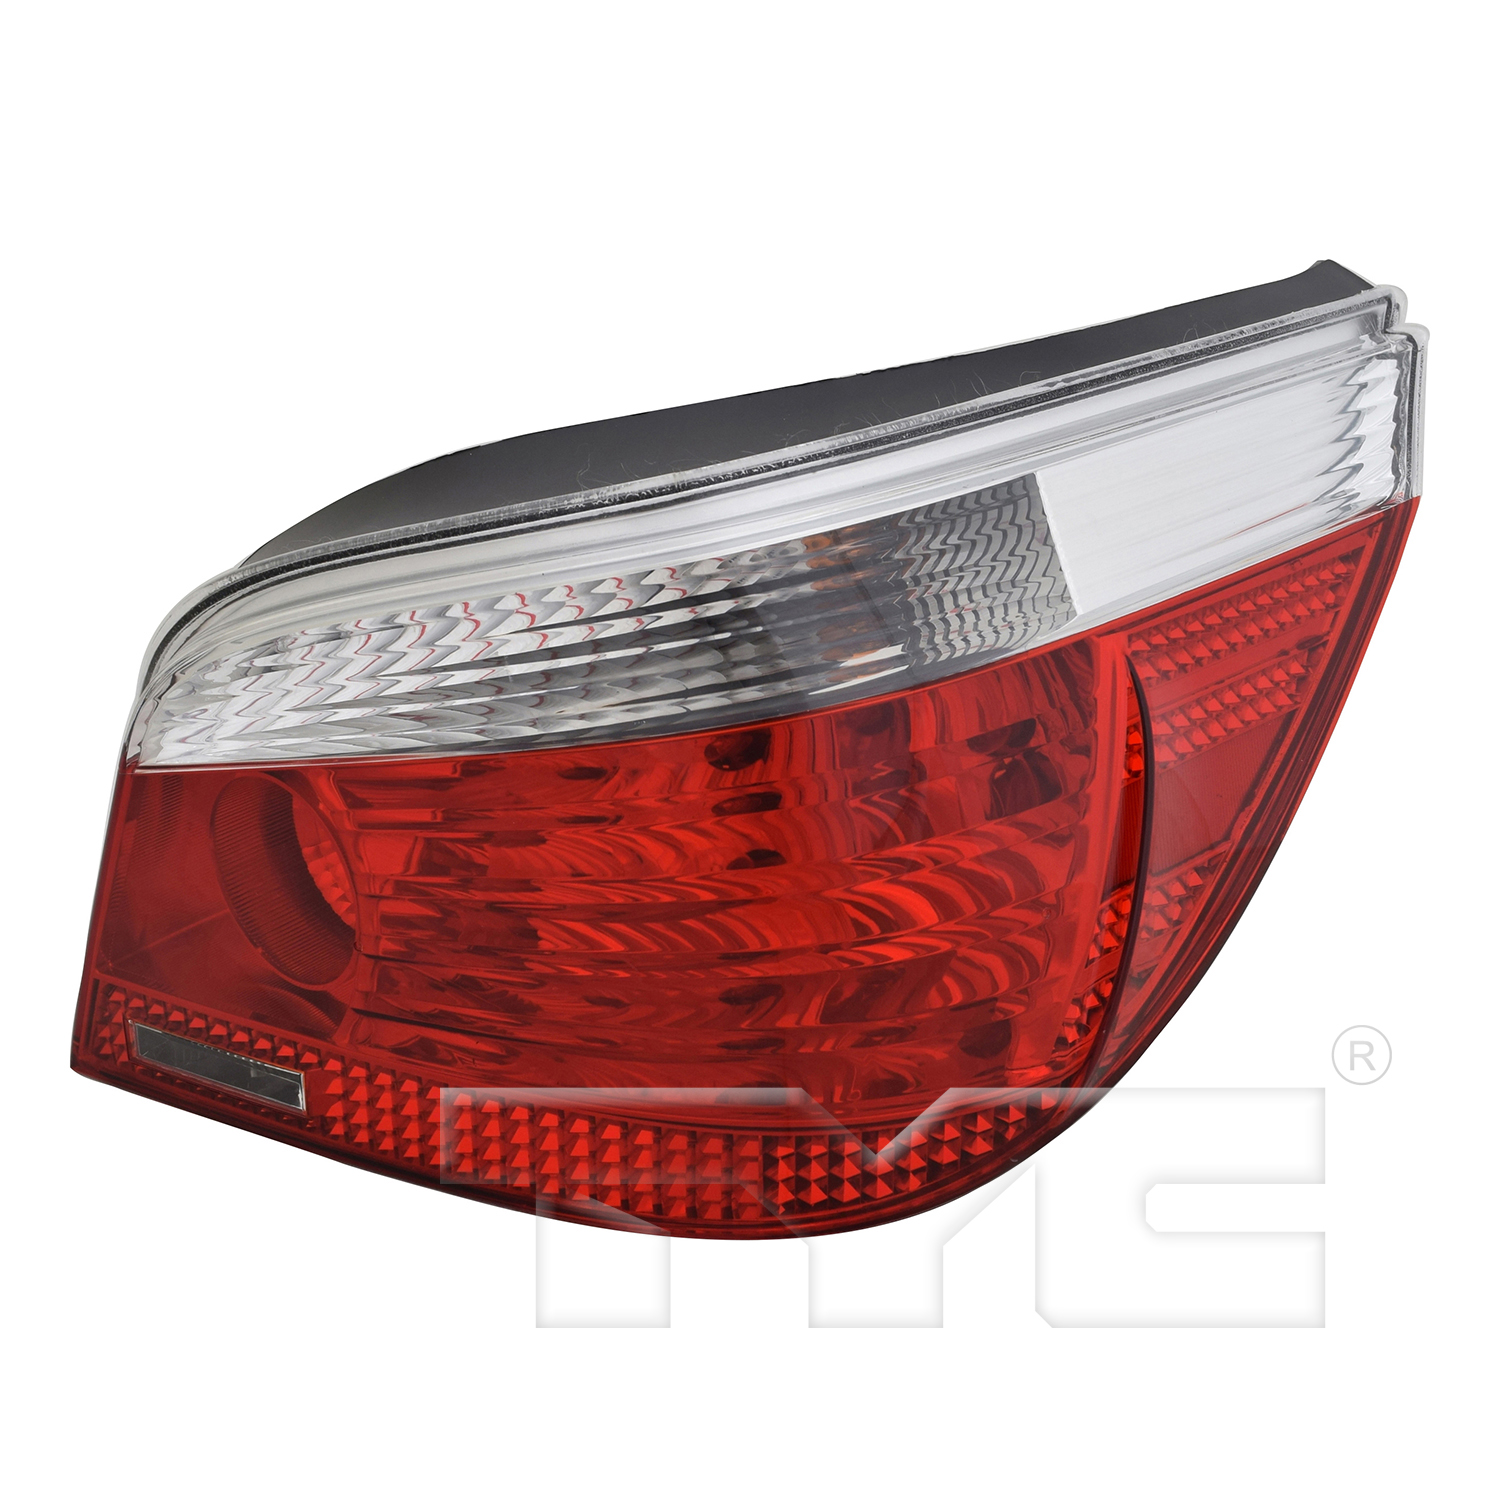 Aftermarket TAILLIGHTS for BMW - 530I, 530i,04-08,RT Taillamp assy